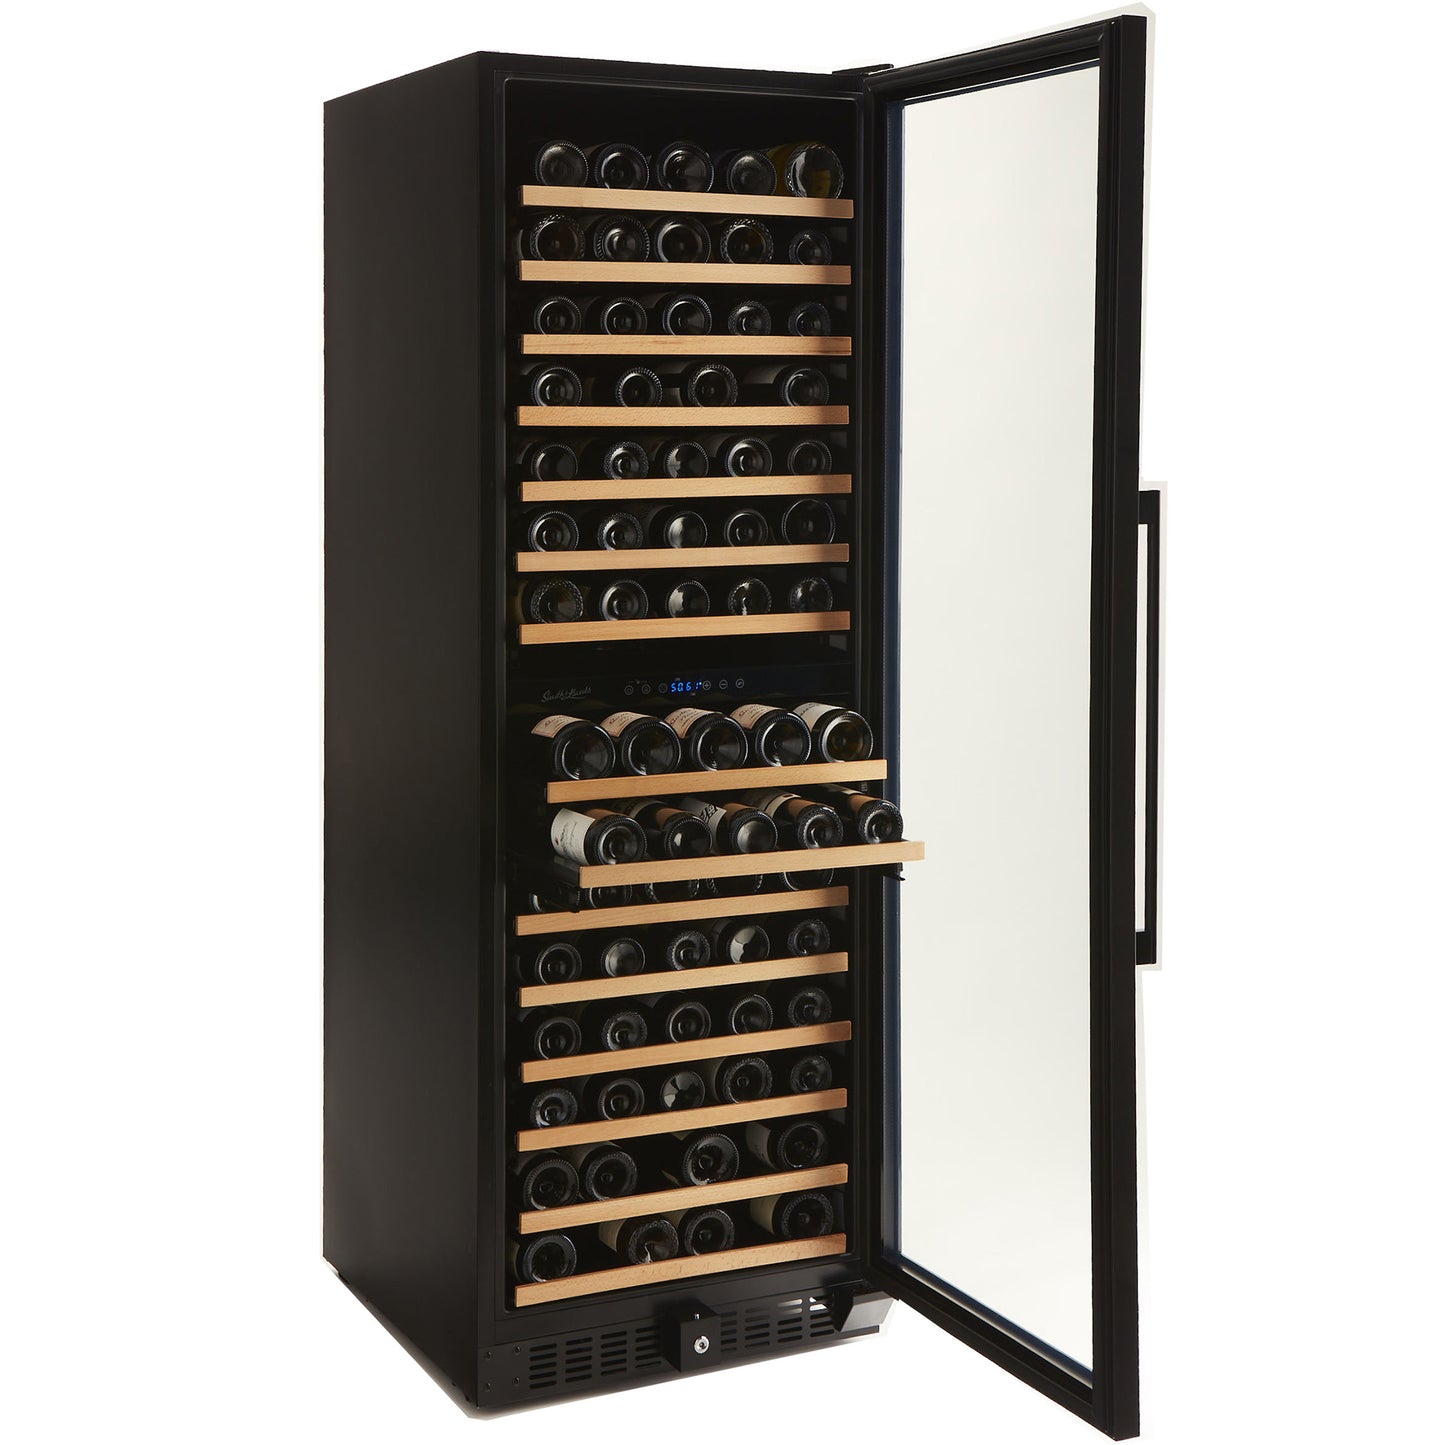 Buy a Smith & Hanks 166 Bottle Single Zone Black Stainless Wine Refrigerator by Chilled Beverages